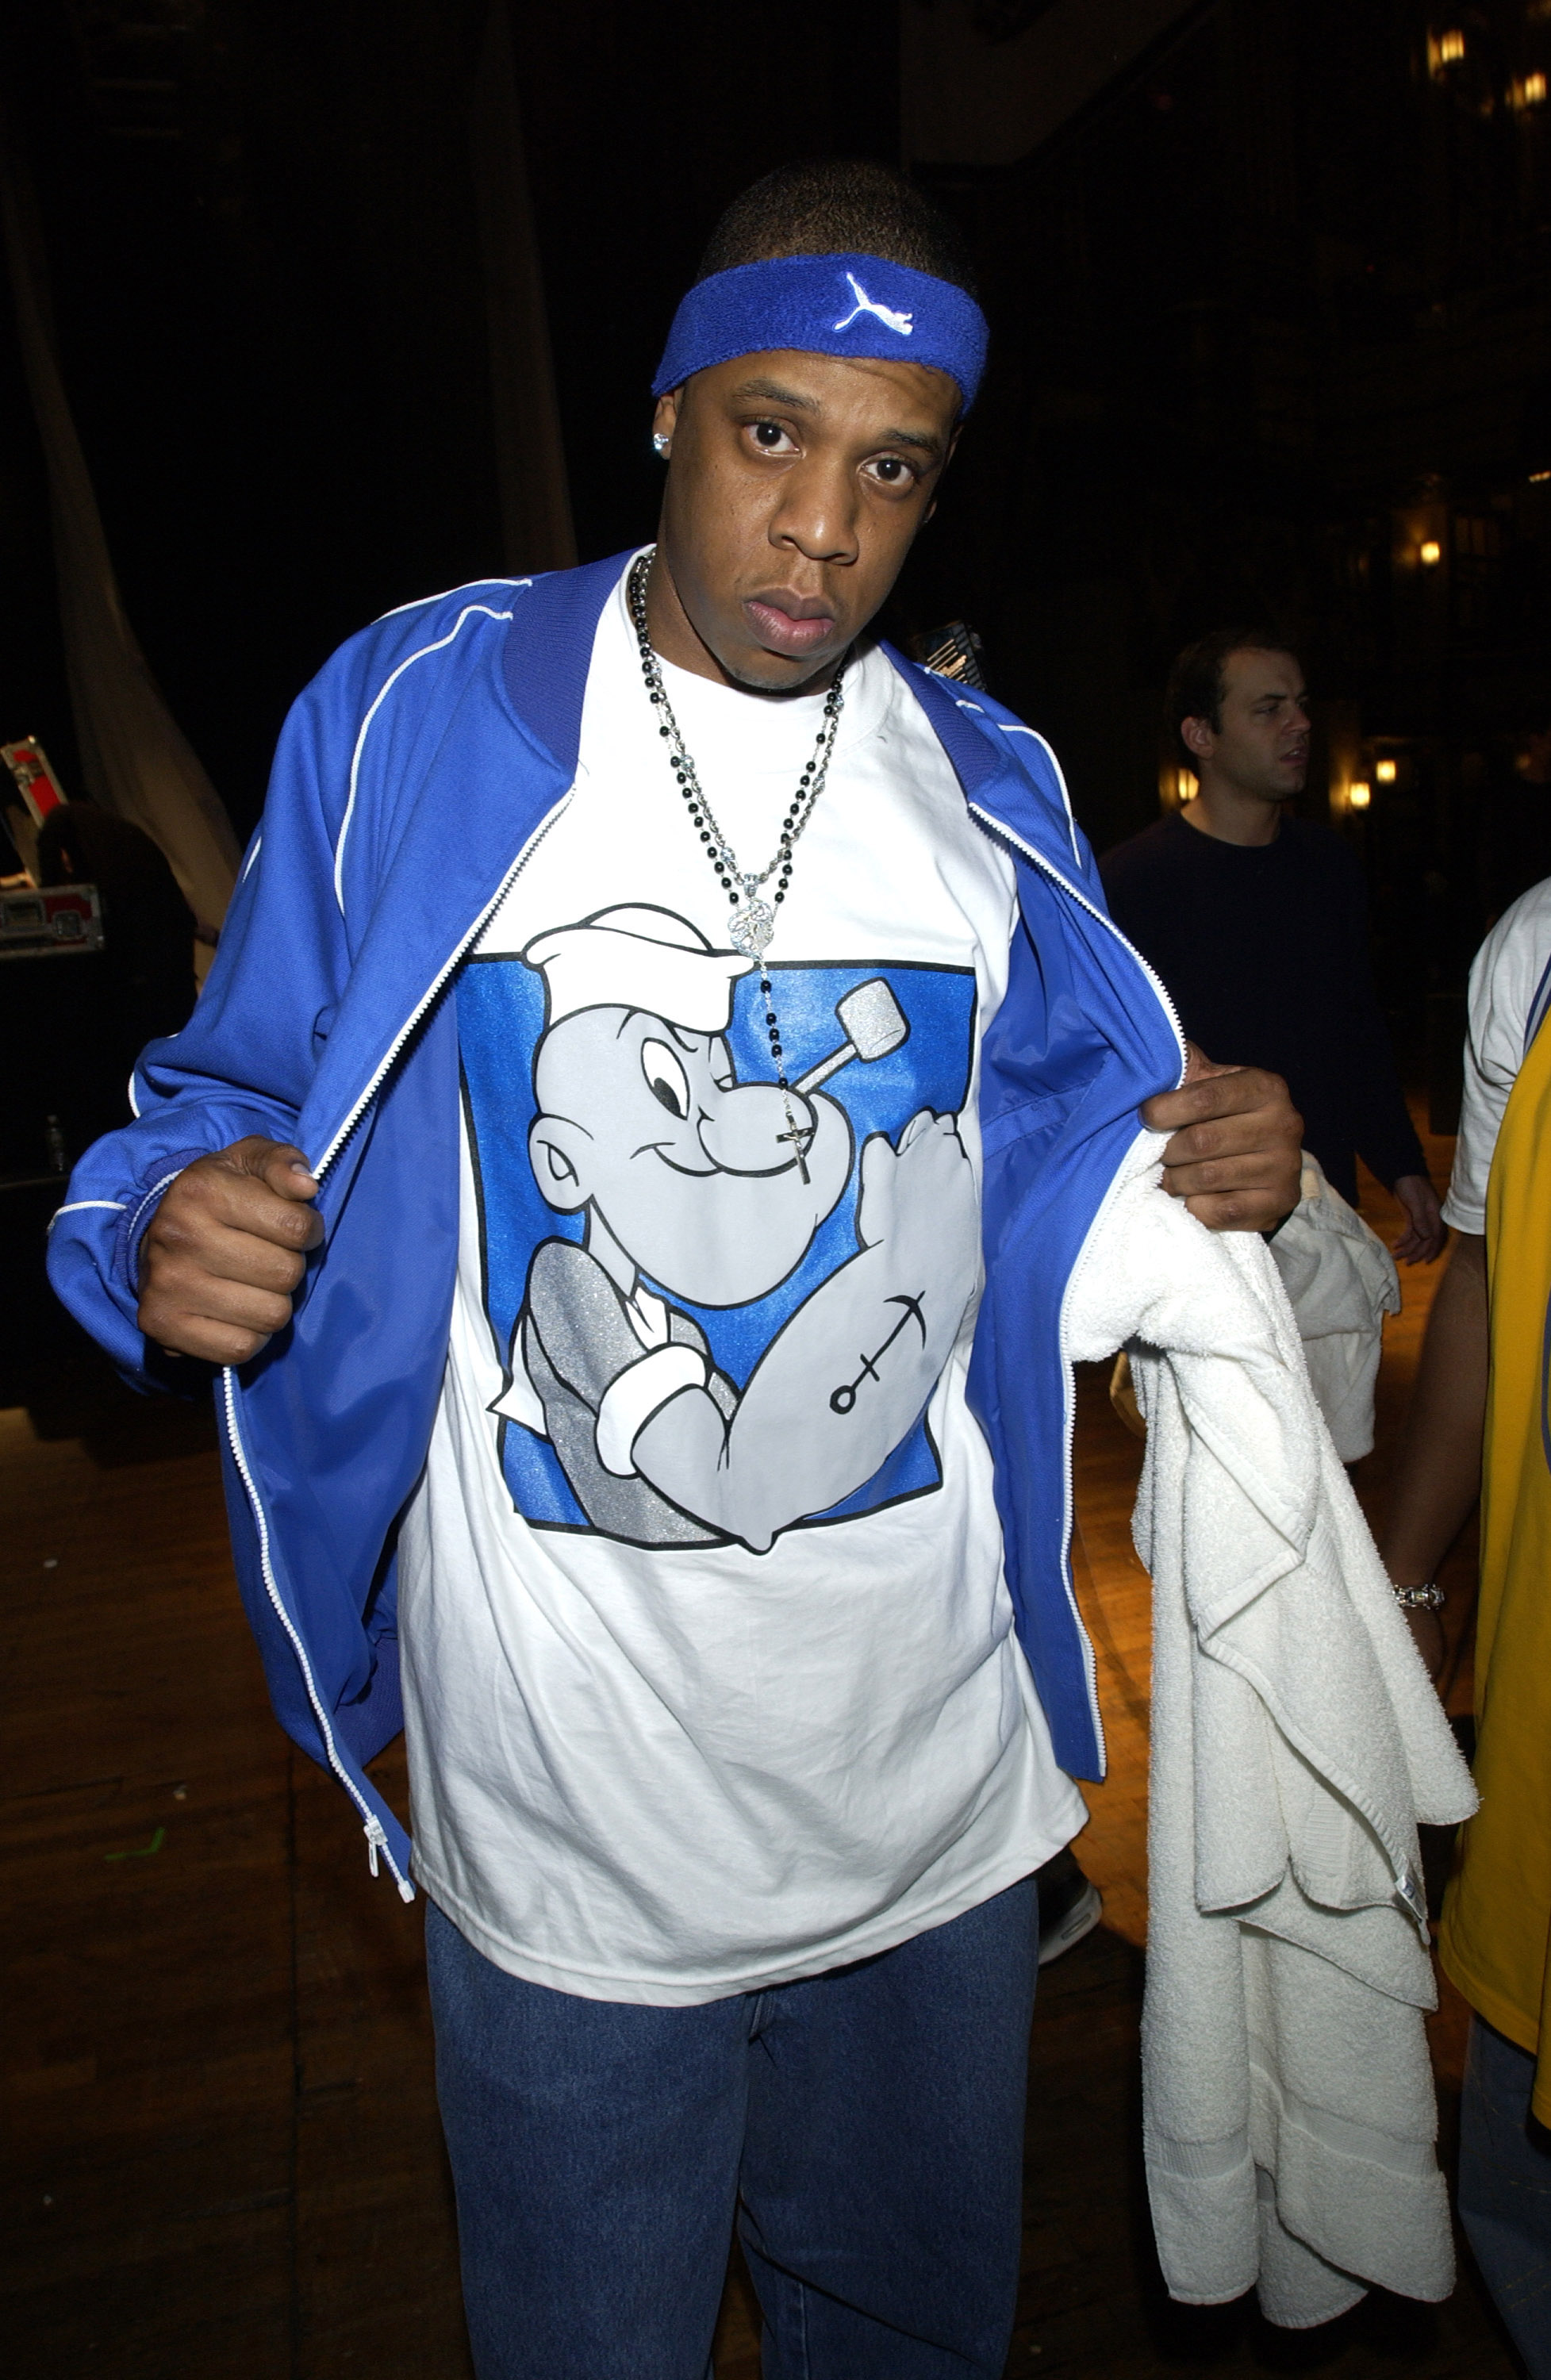 Happy Birthday Hov: A Look Back at Some of Jay-Z's Most Memorable